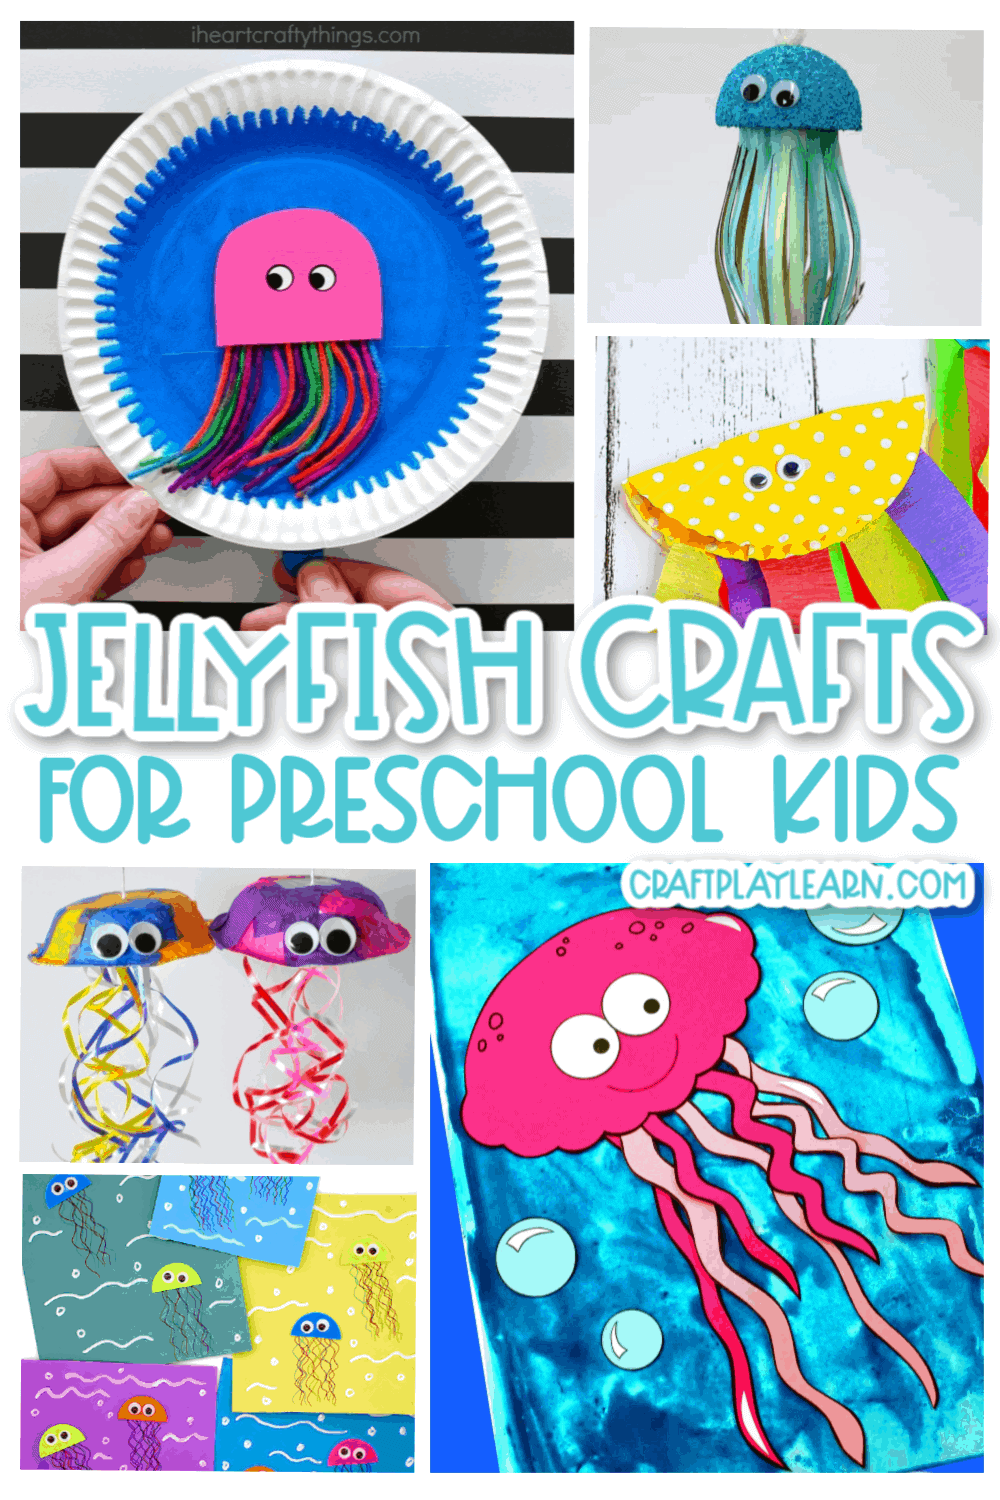 Creative Craft Ideas for Kids  Fun and Easy Art & Craft Ideas for Kids 